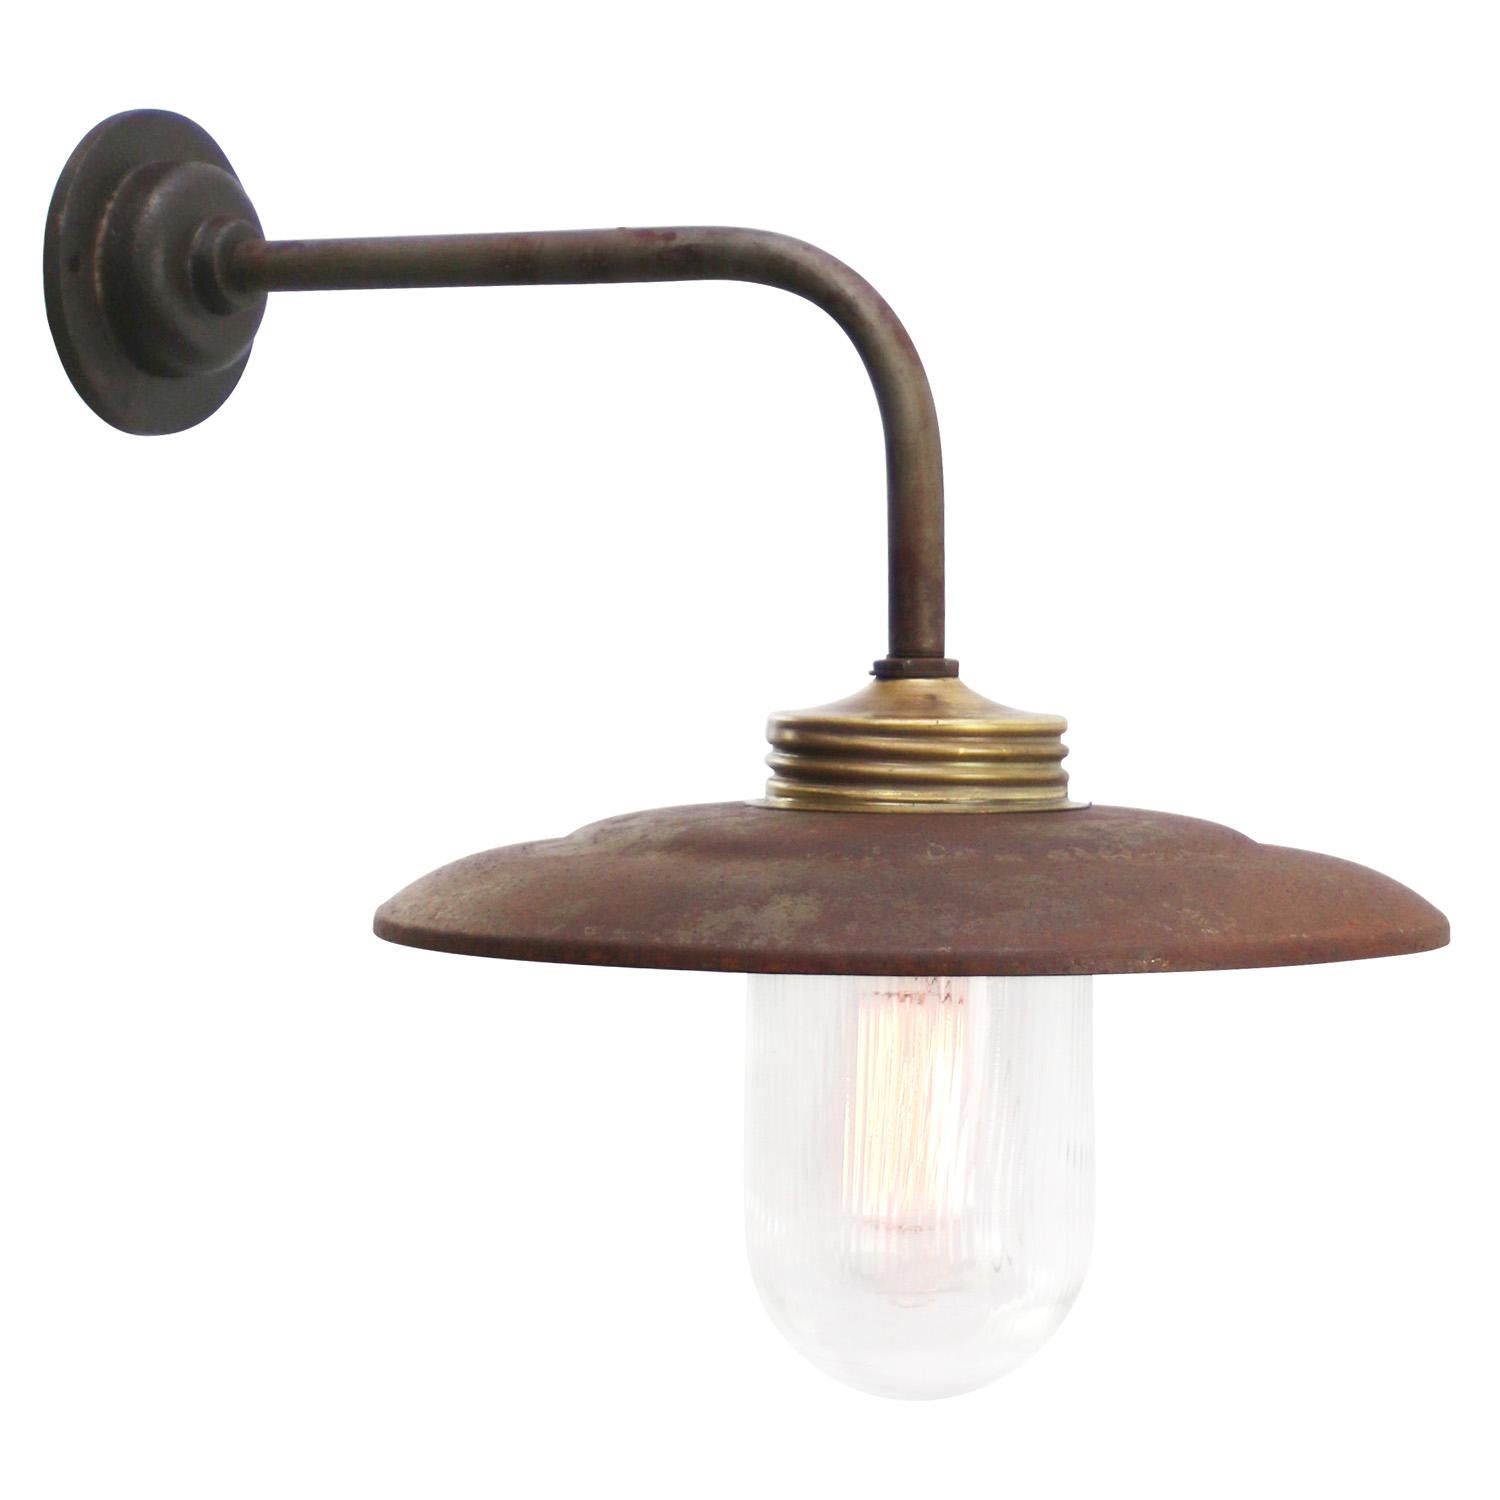 Rust Cast Iron Barn light
Brass top with clear striped glass

Diameter cast iron wall piece: 10.5 cm / 4 inches
2 holes to secure

Weight: 2.00 kg / 4.4 lb

Priced per individual item. All lamps have been made suitable by international standards for